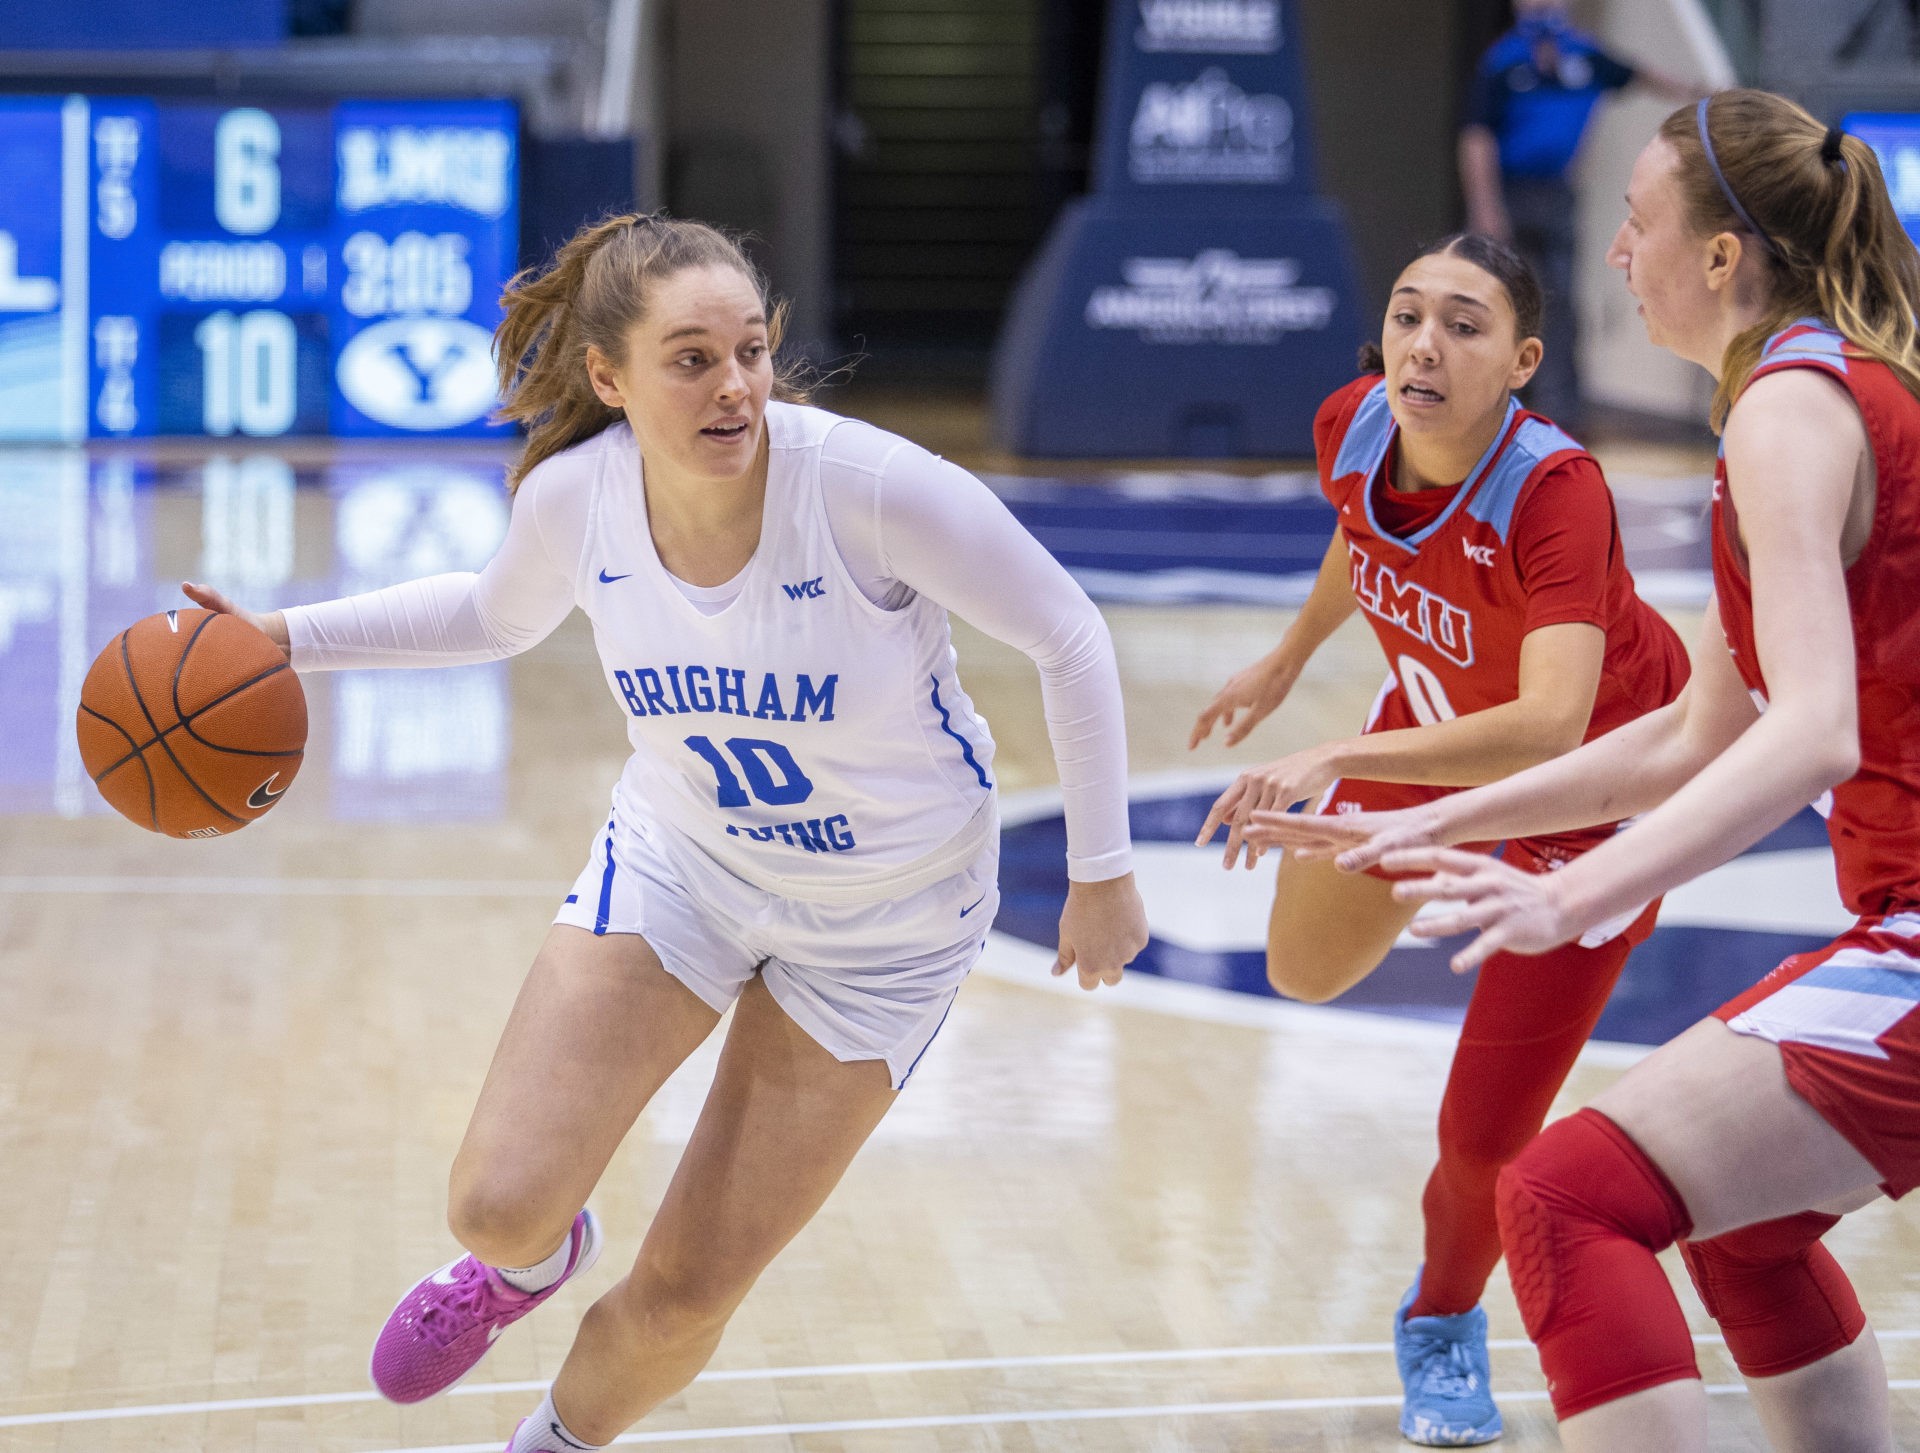 BYU women's basketball stays undefeated at home with 69-50 win over LMU